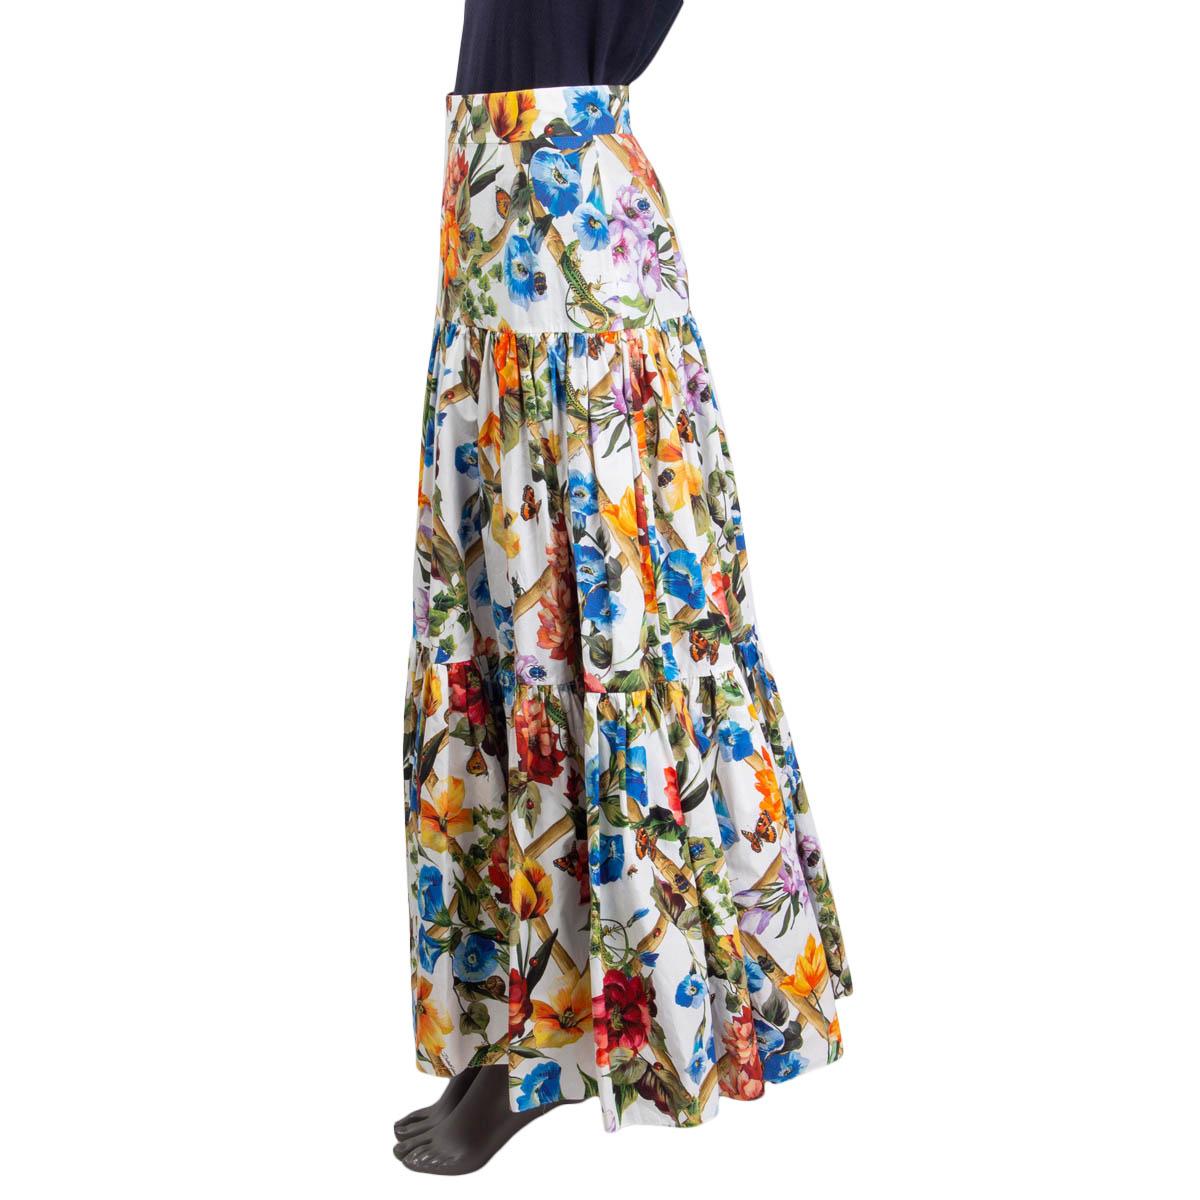 100% authentic Dolce & Gabbana Floral Bamboo print pleated maxi skirt in white, green, orange, burgundy and blue cotton (100%). Resort 2018. Features a floral print and opens with a button, two push buttons and a concealed zipper on the back.